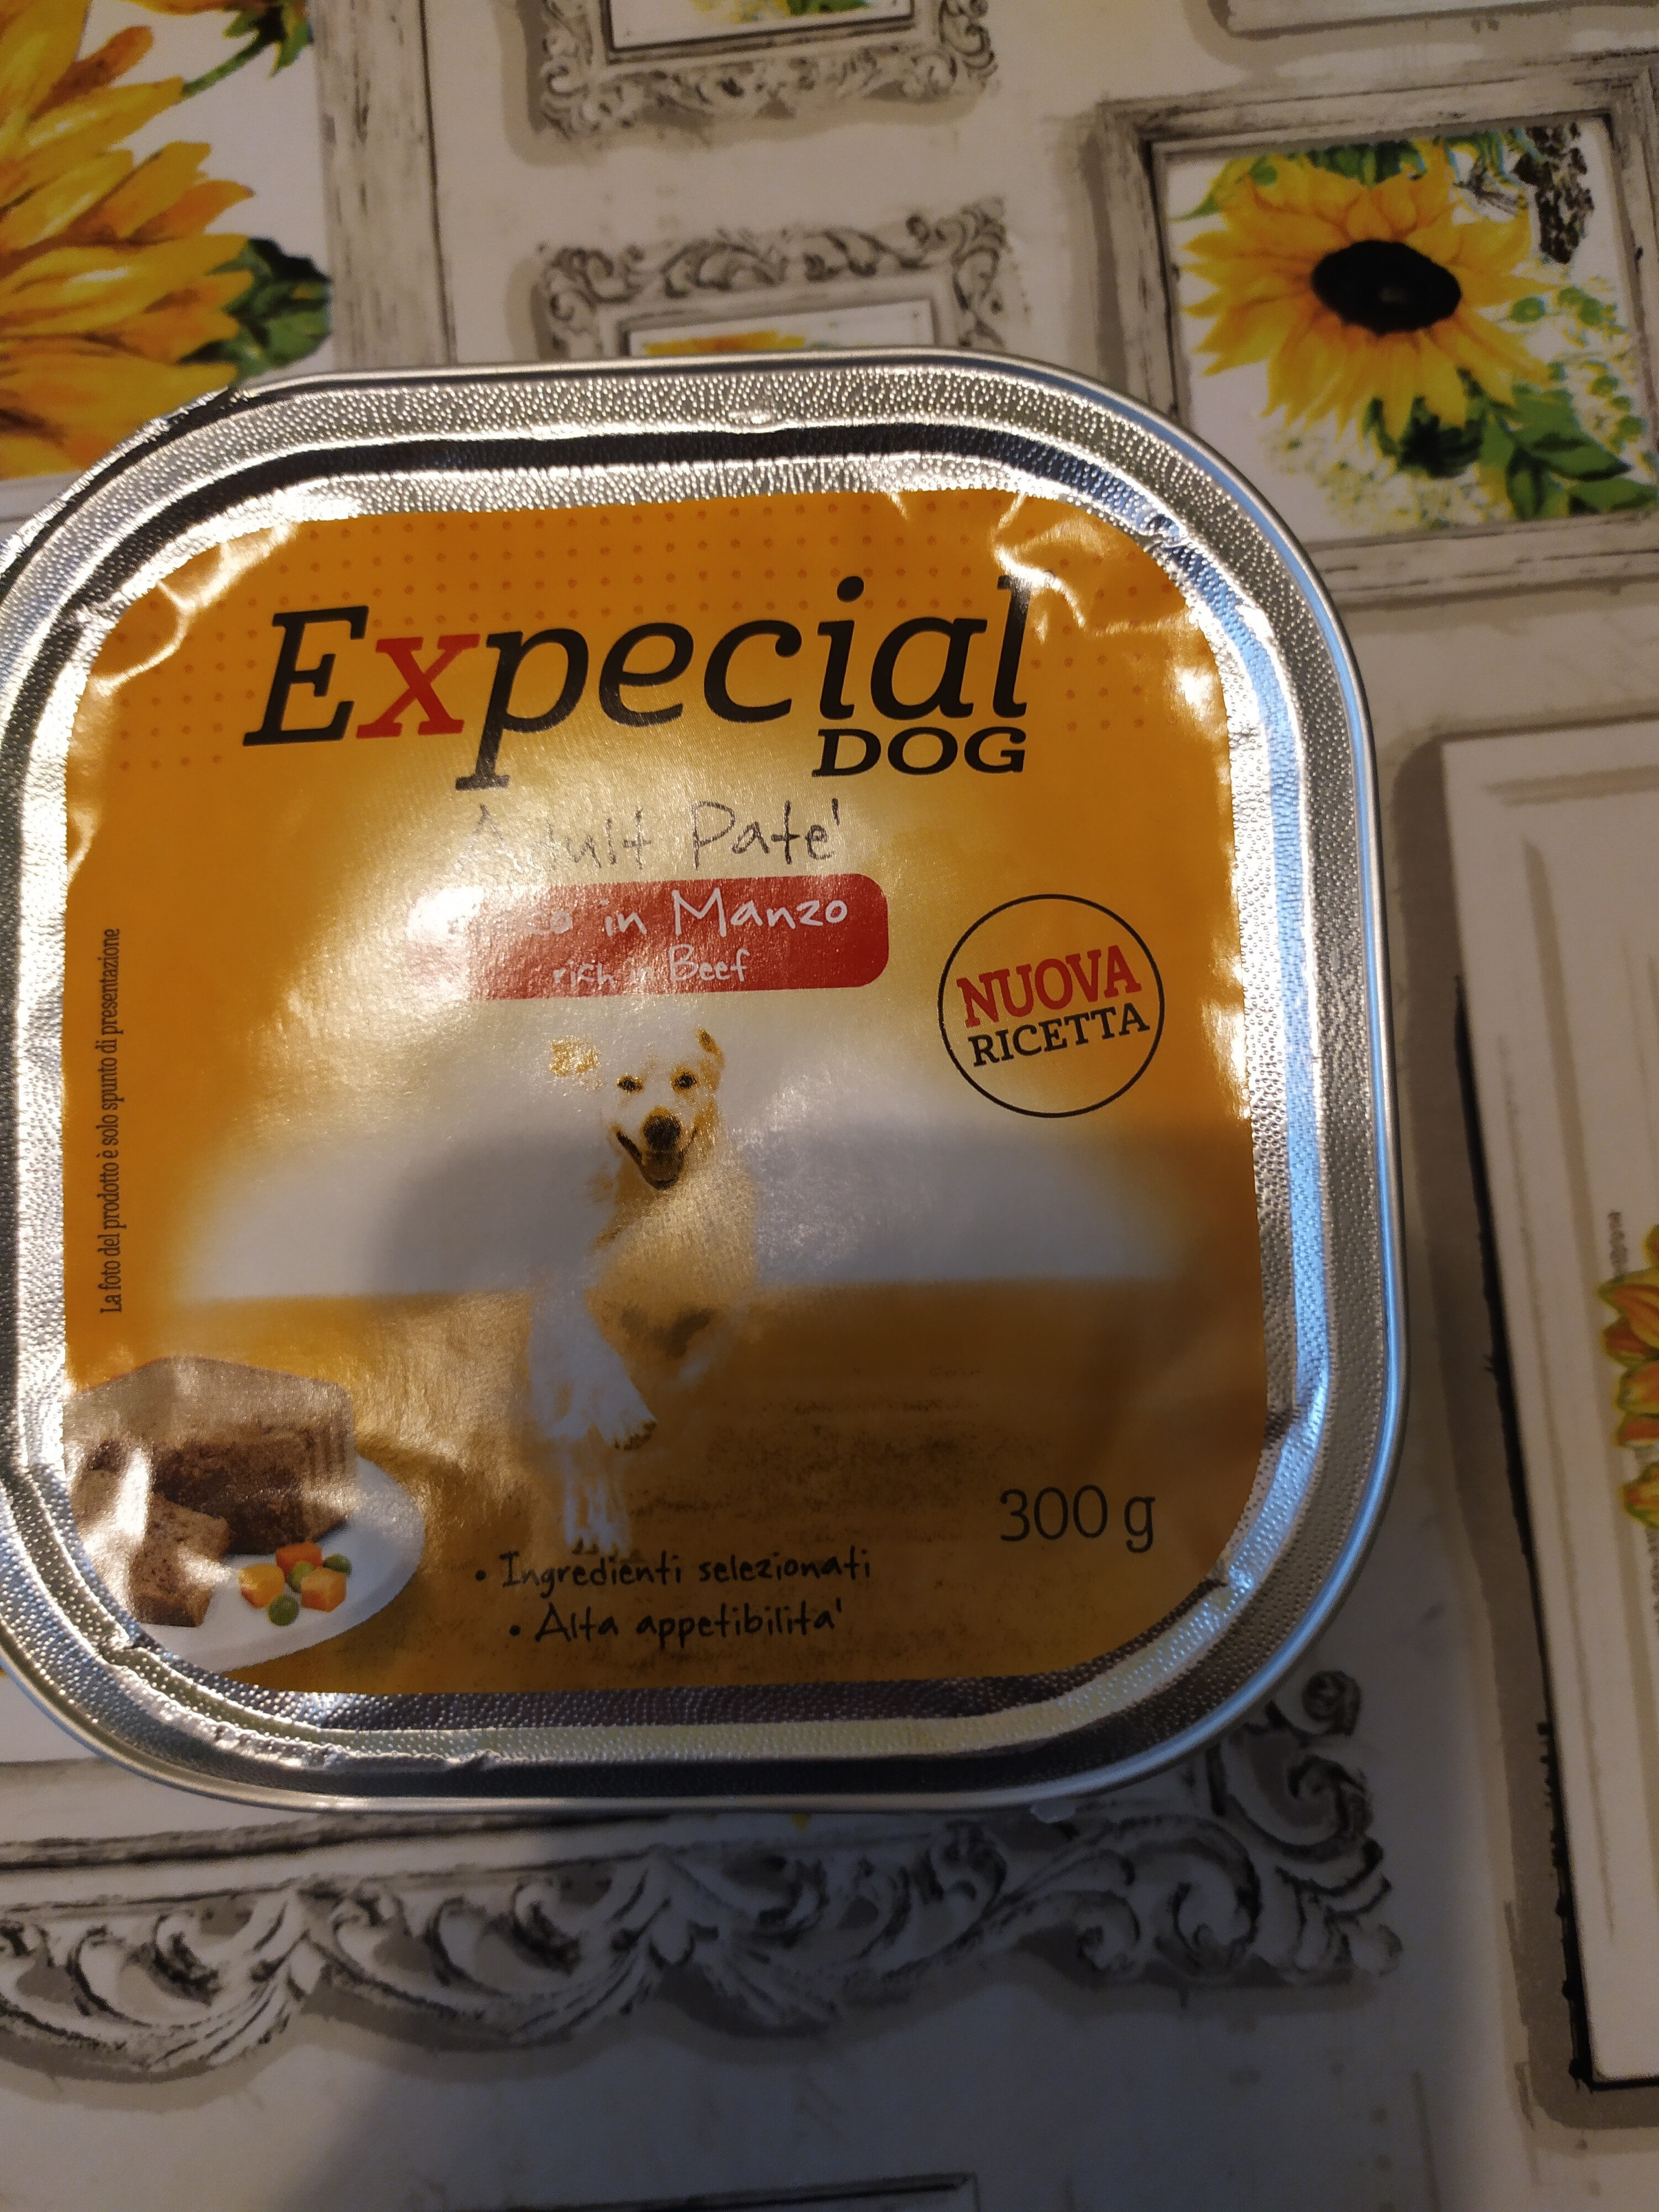 Expecial dog Adulti Patè - Product - it